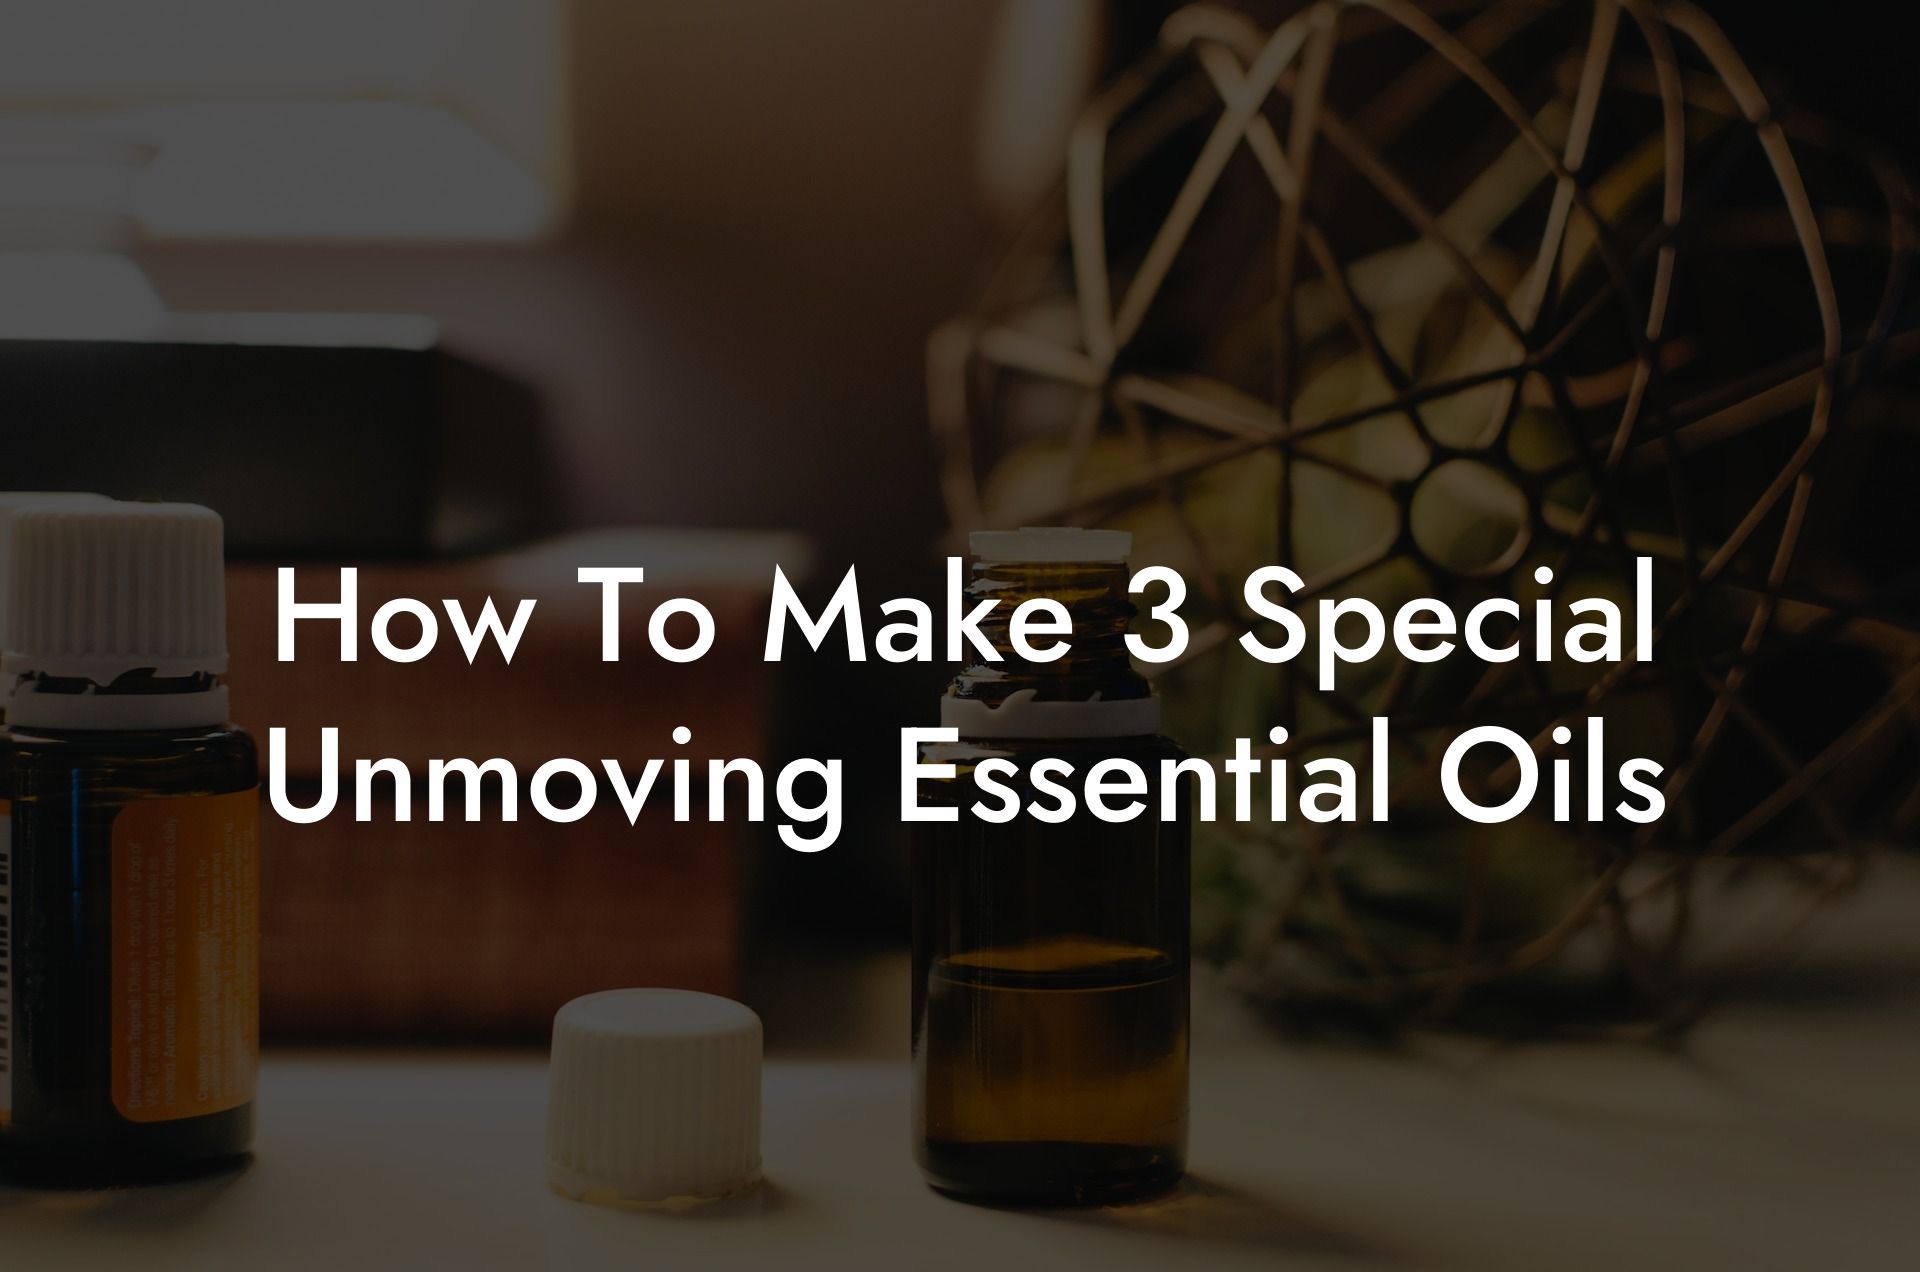 How To Make 3 Special Unmoving Essential Oils